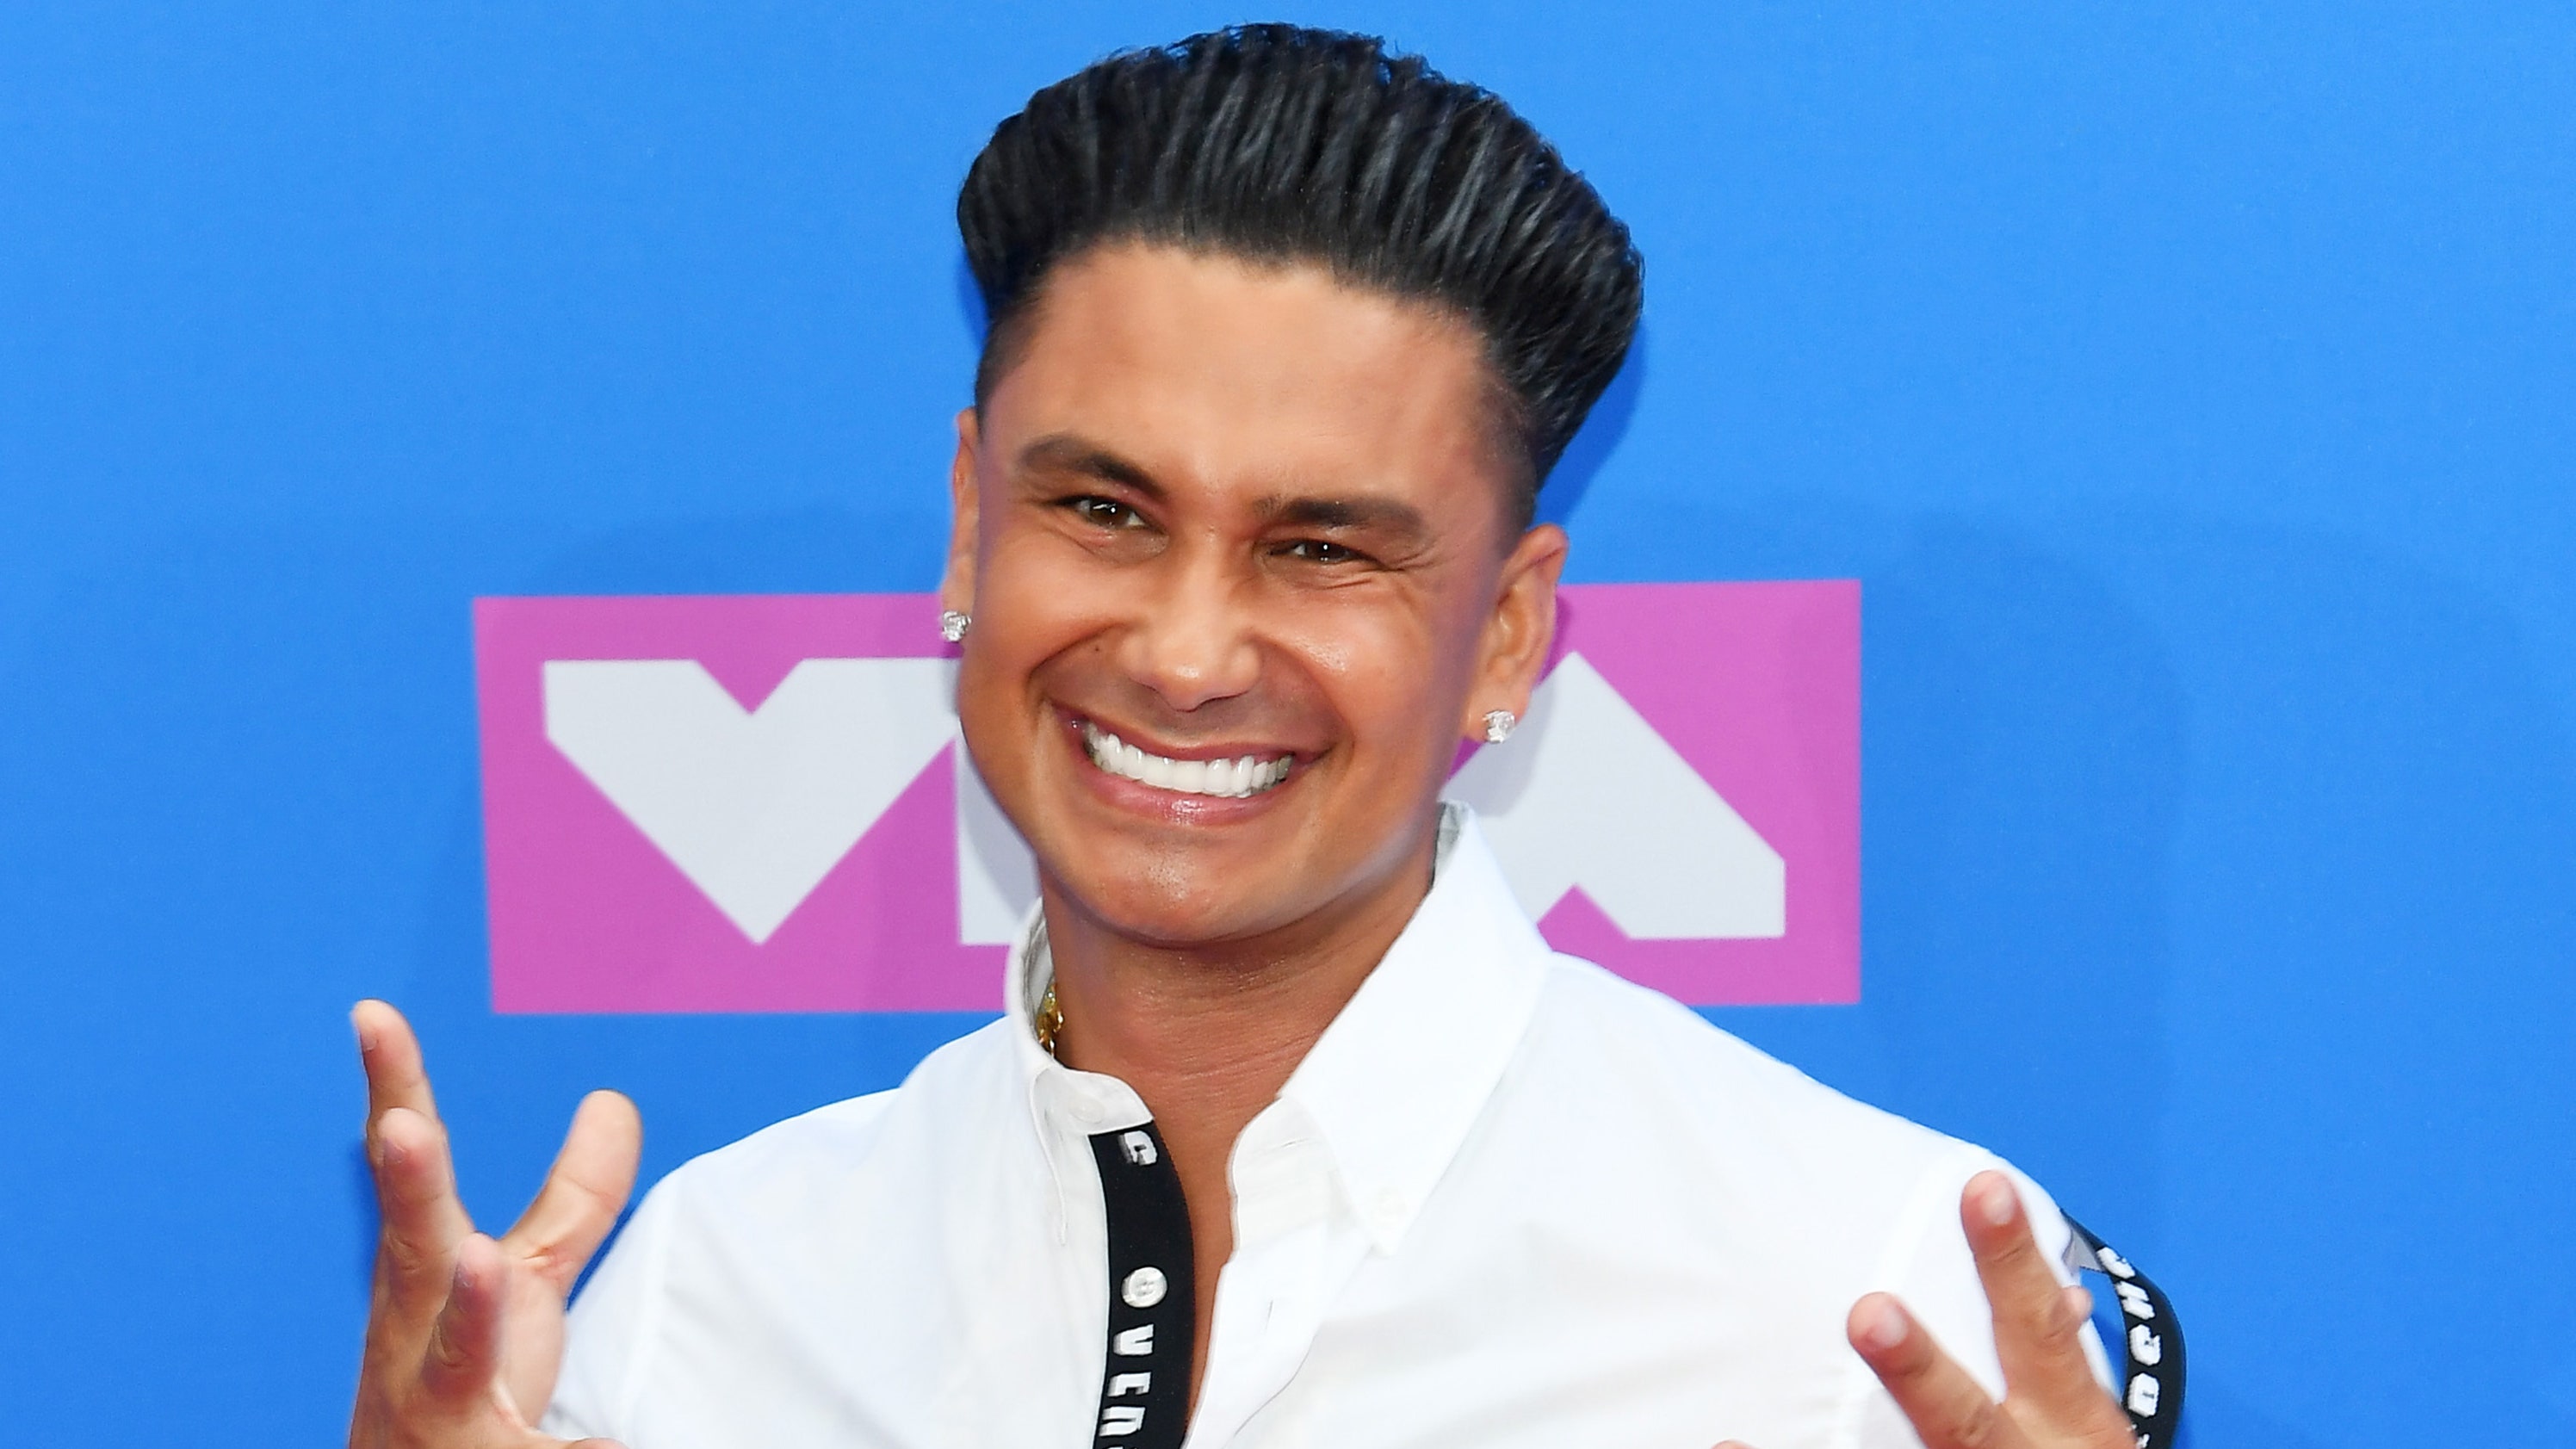 Pauly D from The Jersey Shore Has a Quarantine Mustache